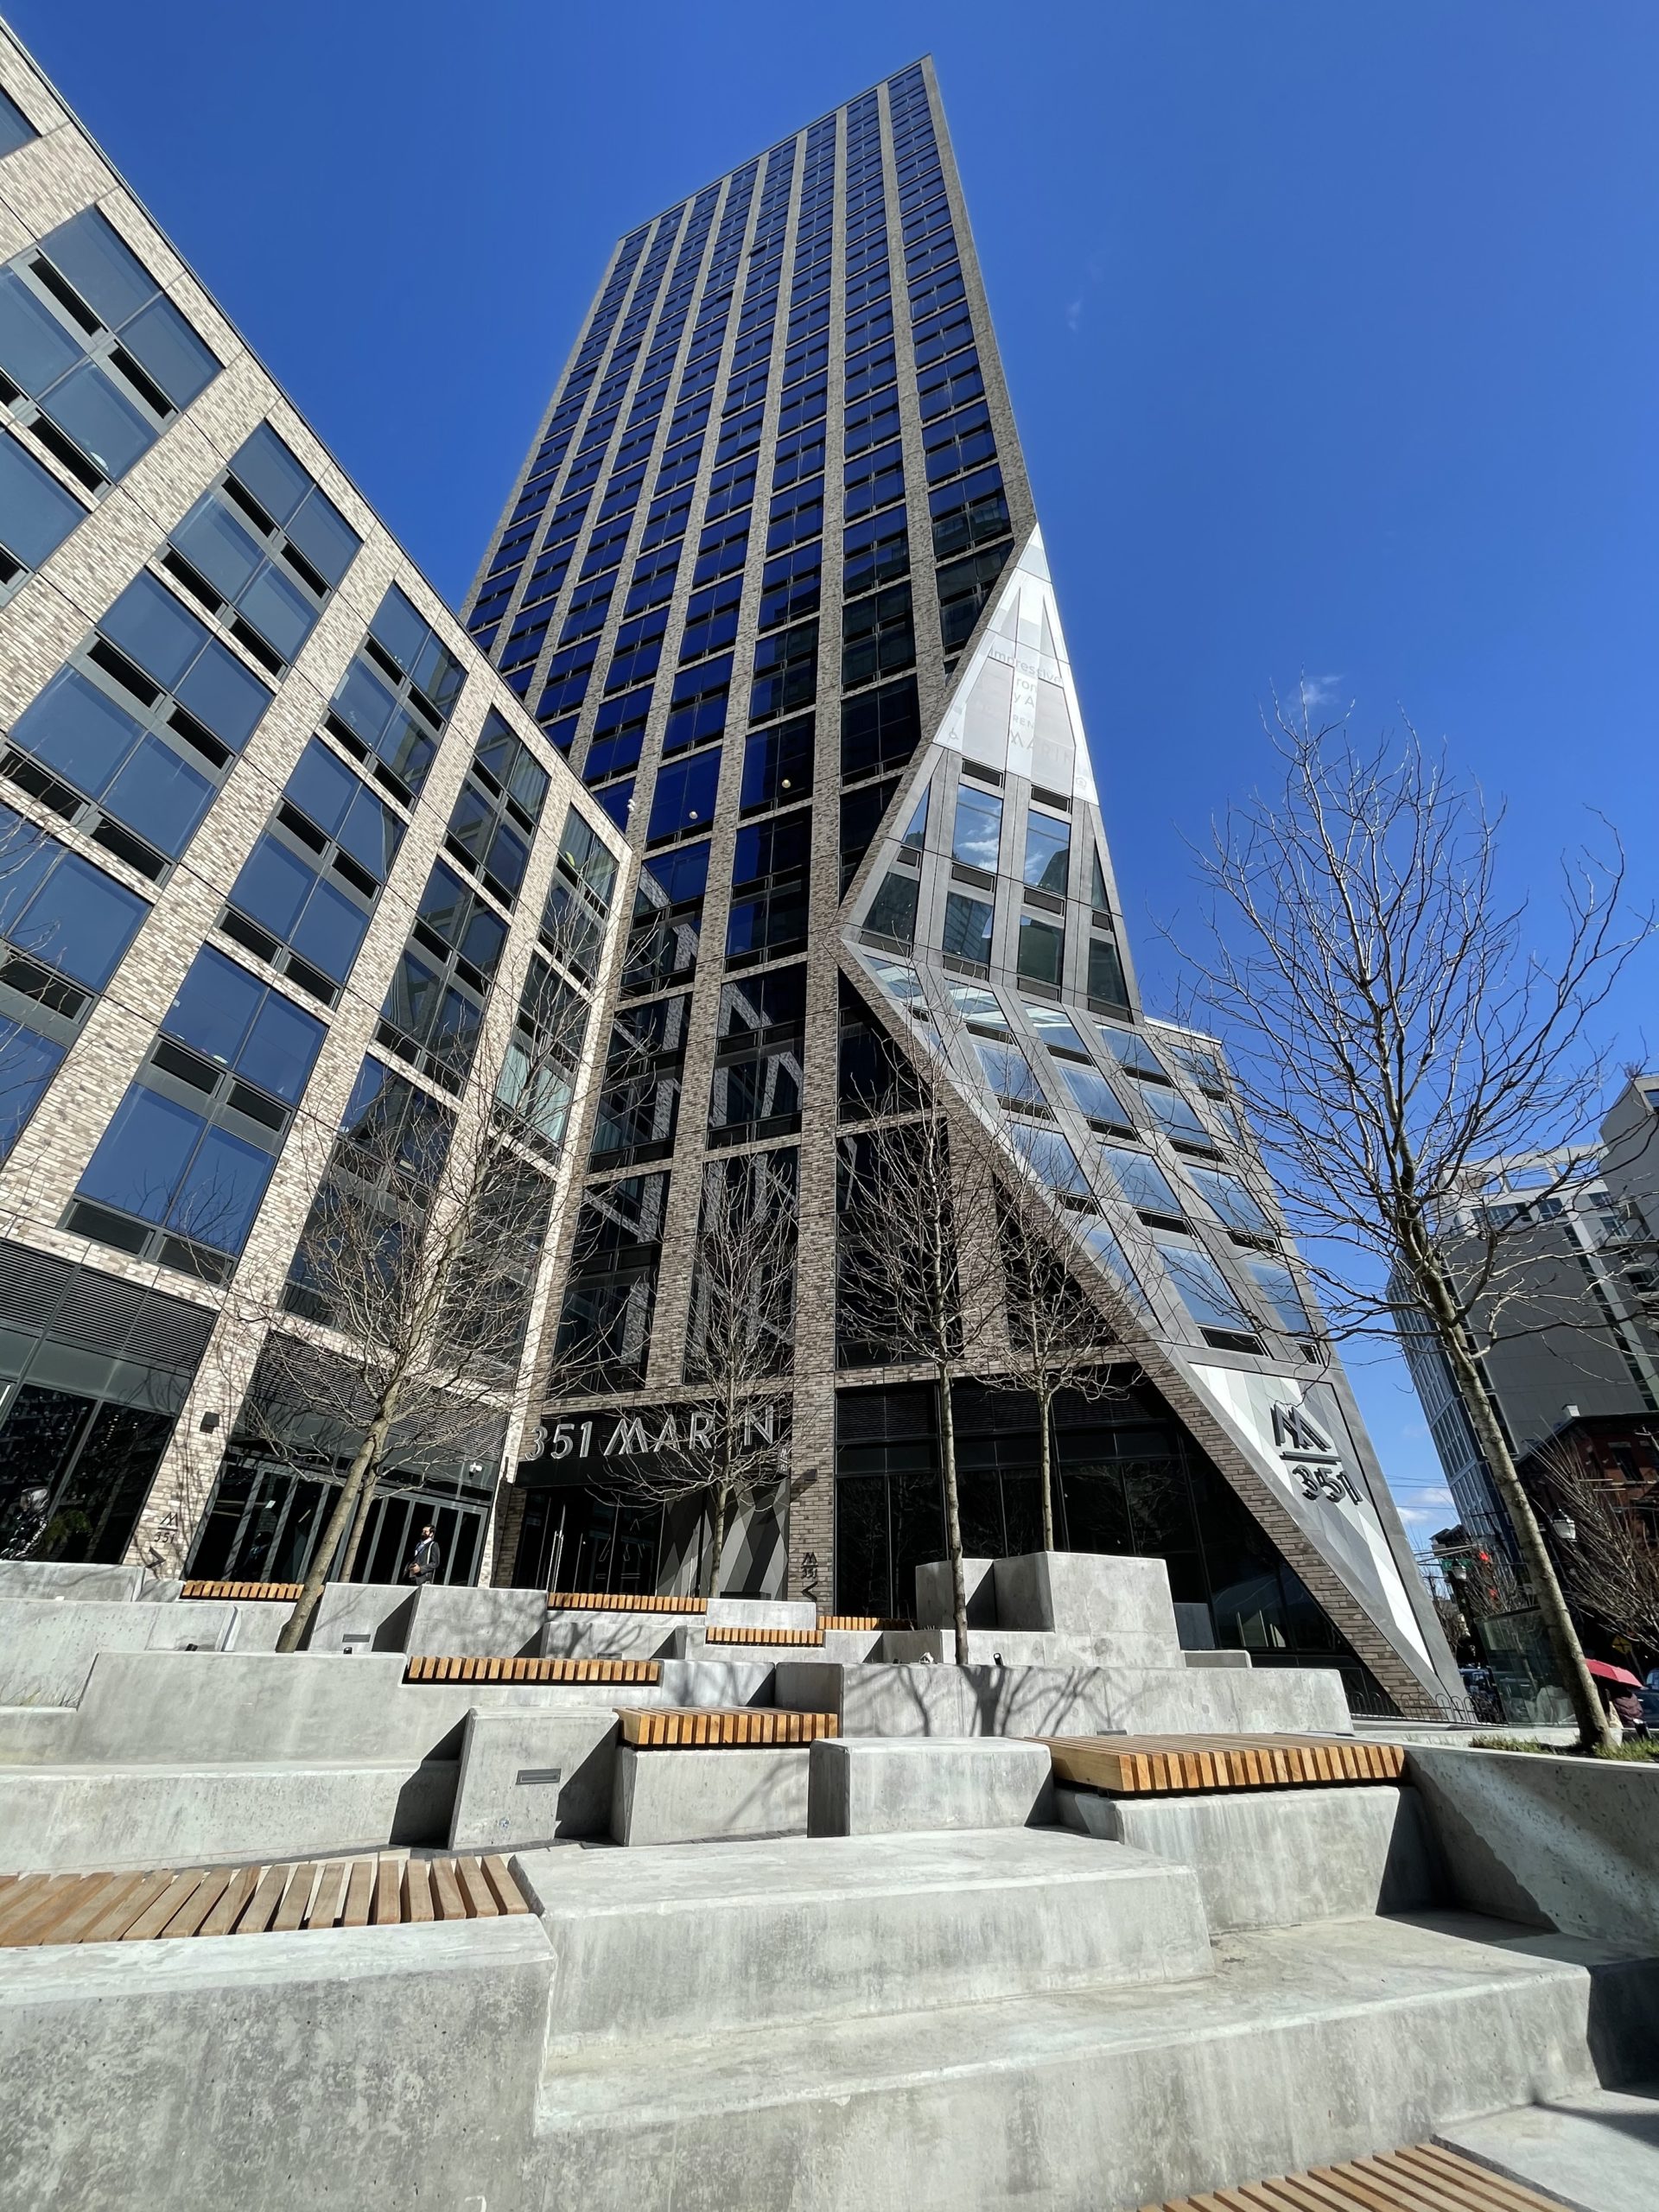 351 Marin Boulevard Completes Construction in Jersey City, New Jersey - New York YIMBY